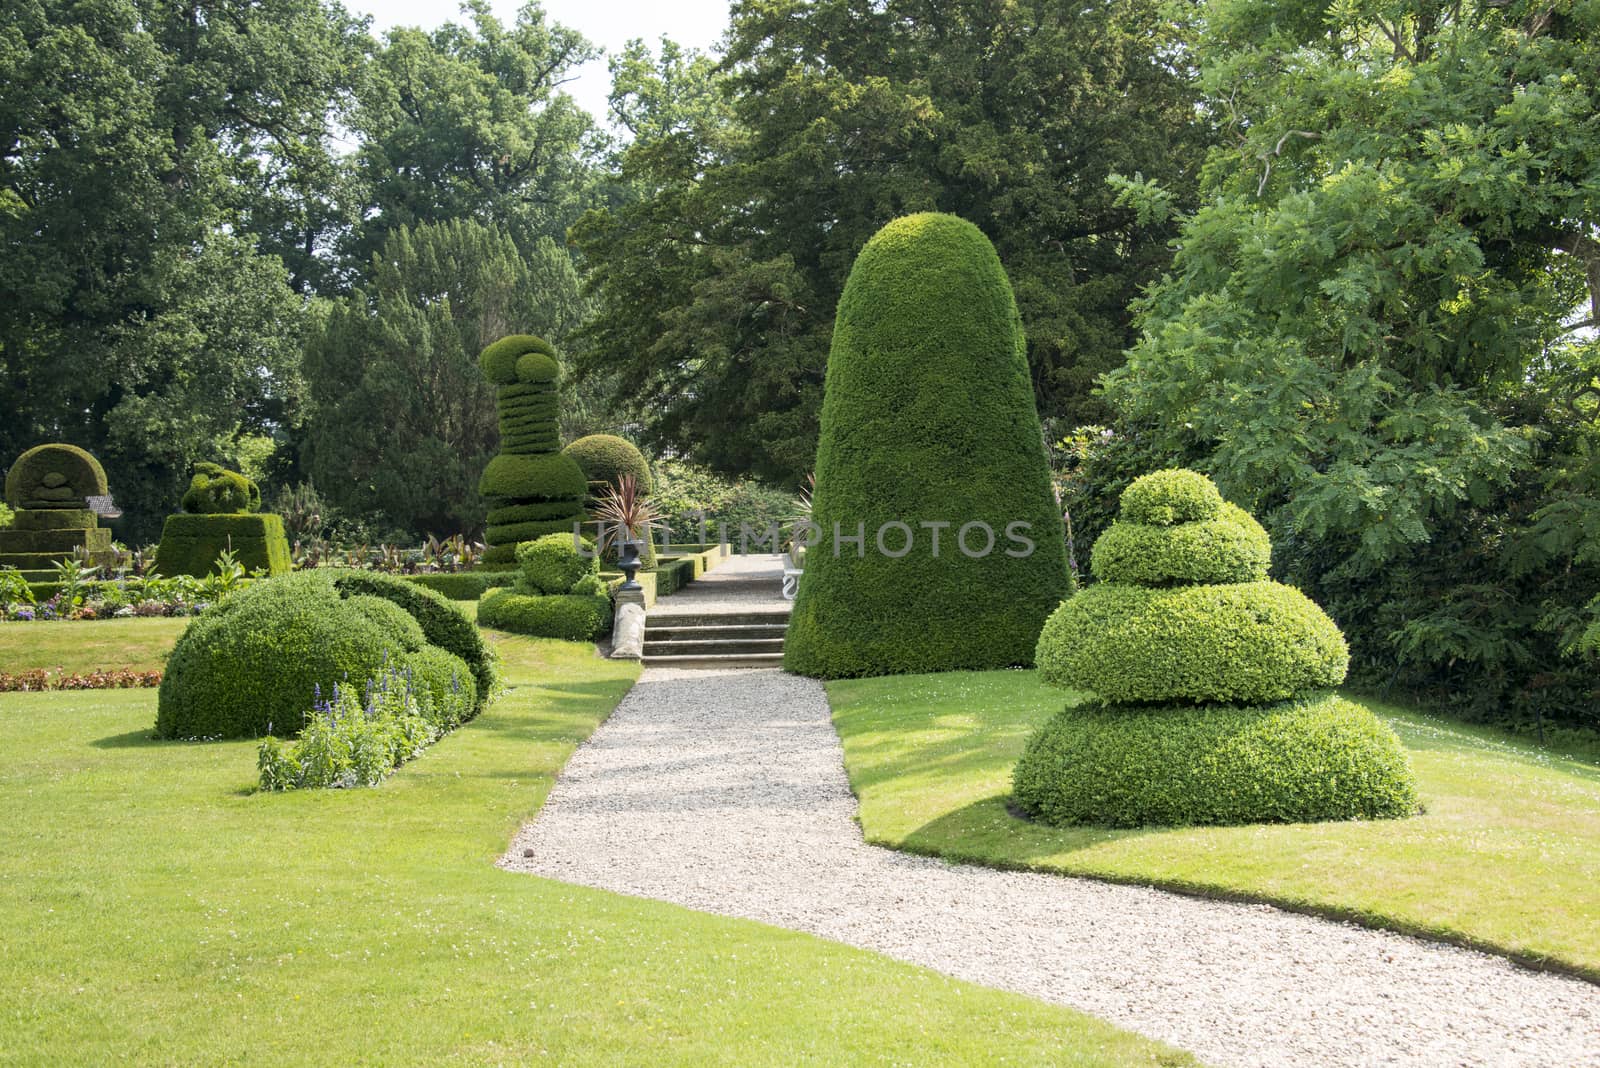 big park with trees and buxus plants by compuinfoto